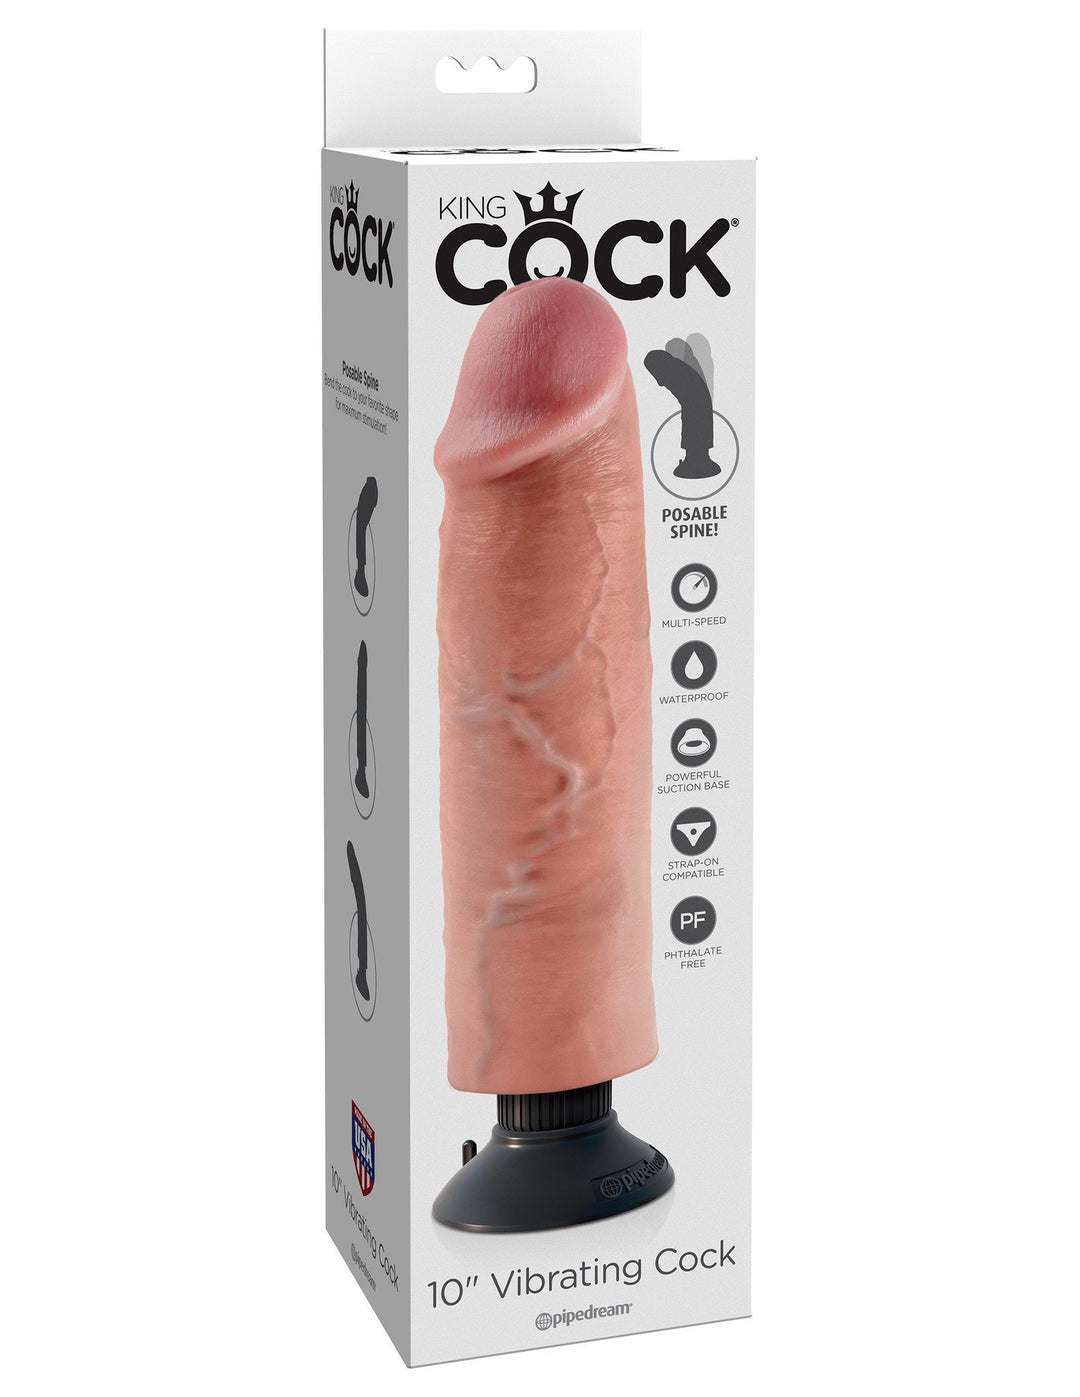 King Cock 10 in. Vibrating Cock - joujou.com.au